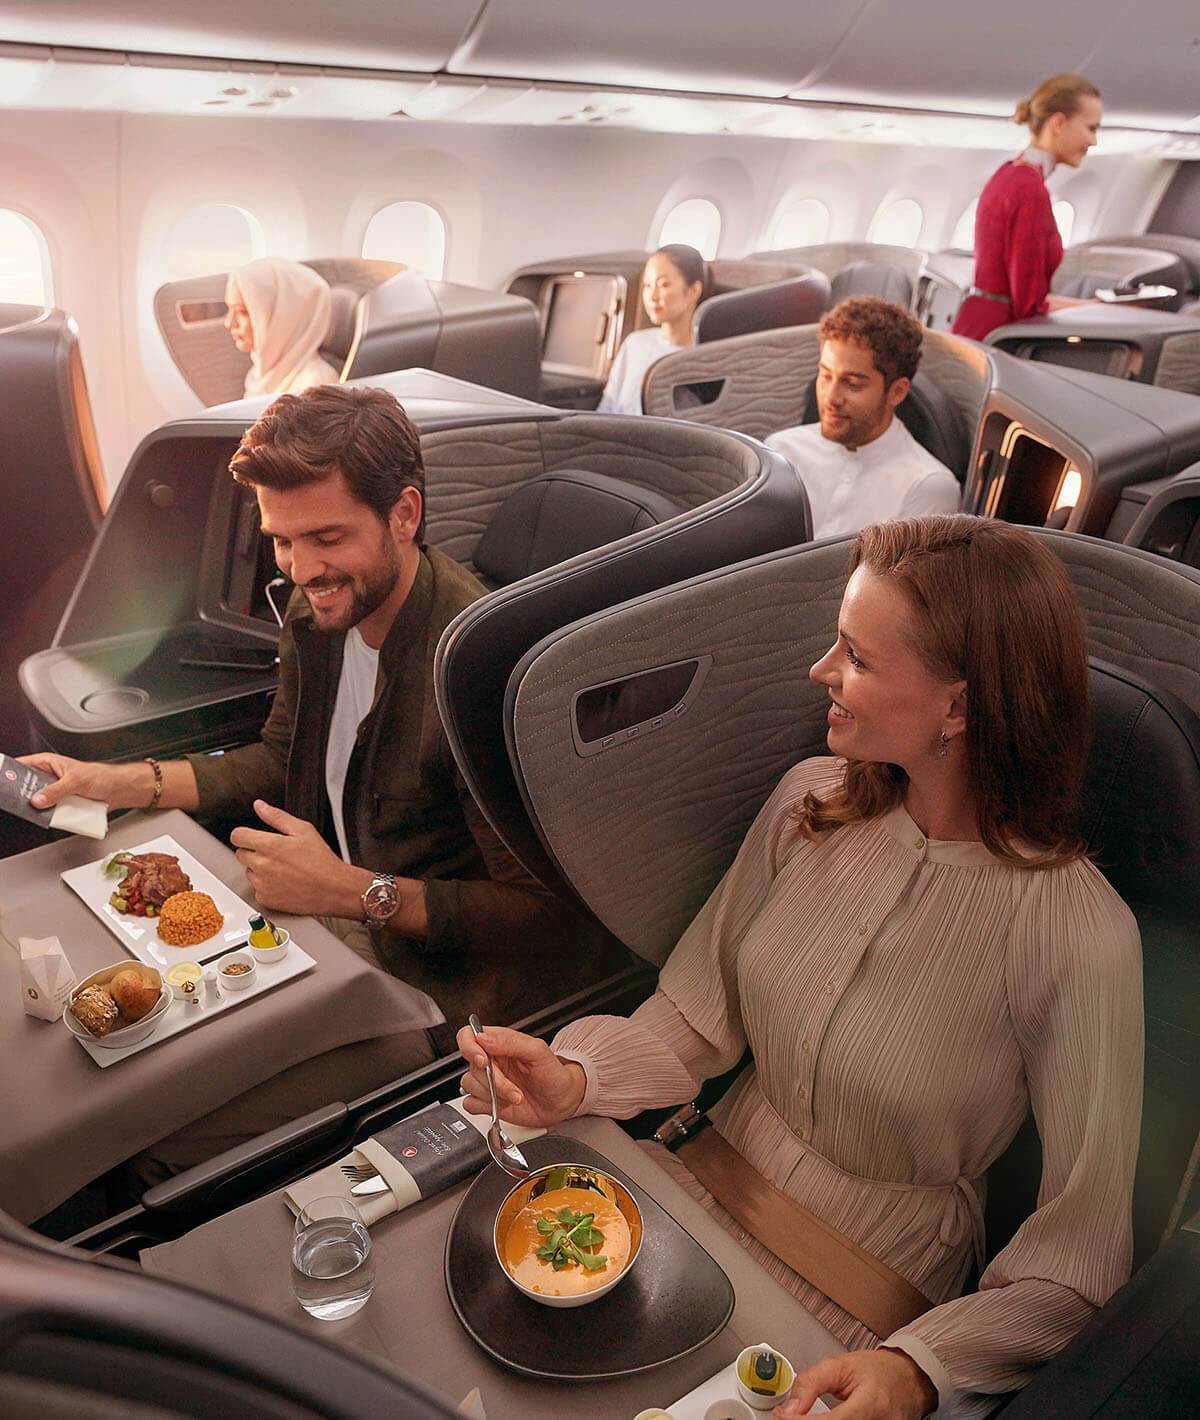 Business class cabin showing passengers enjoy the meal service, while a cabin crew serves a passenger